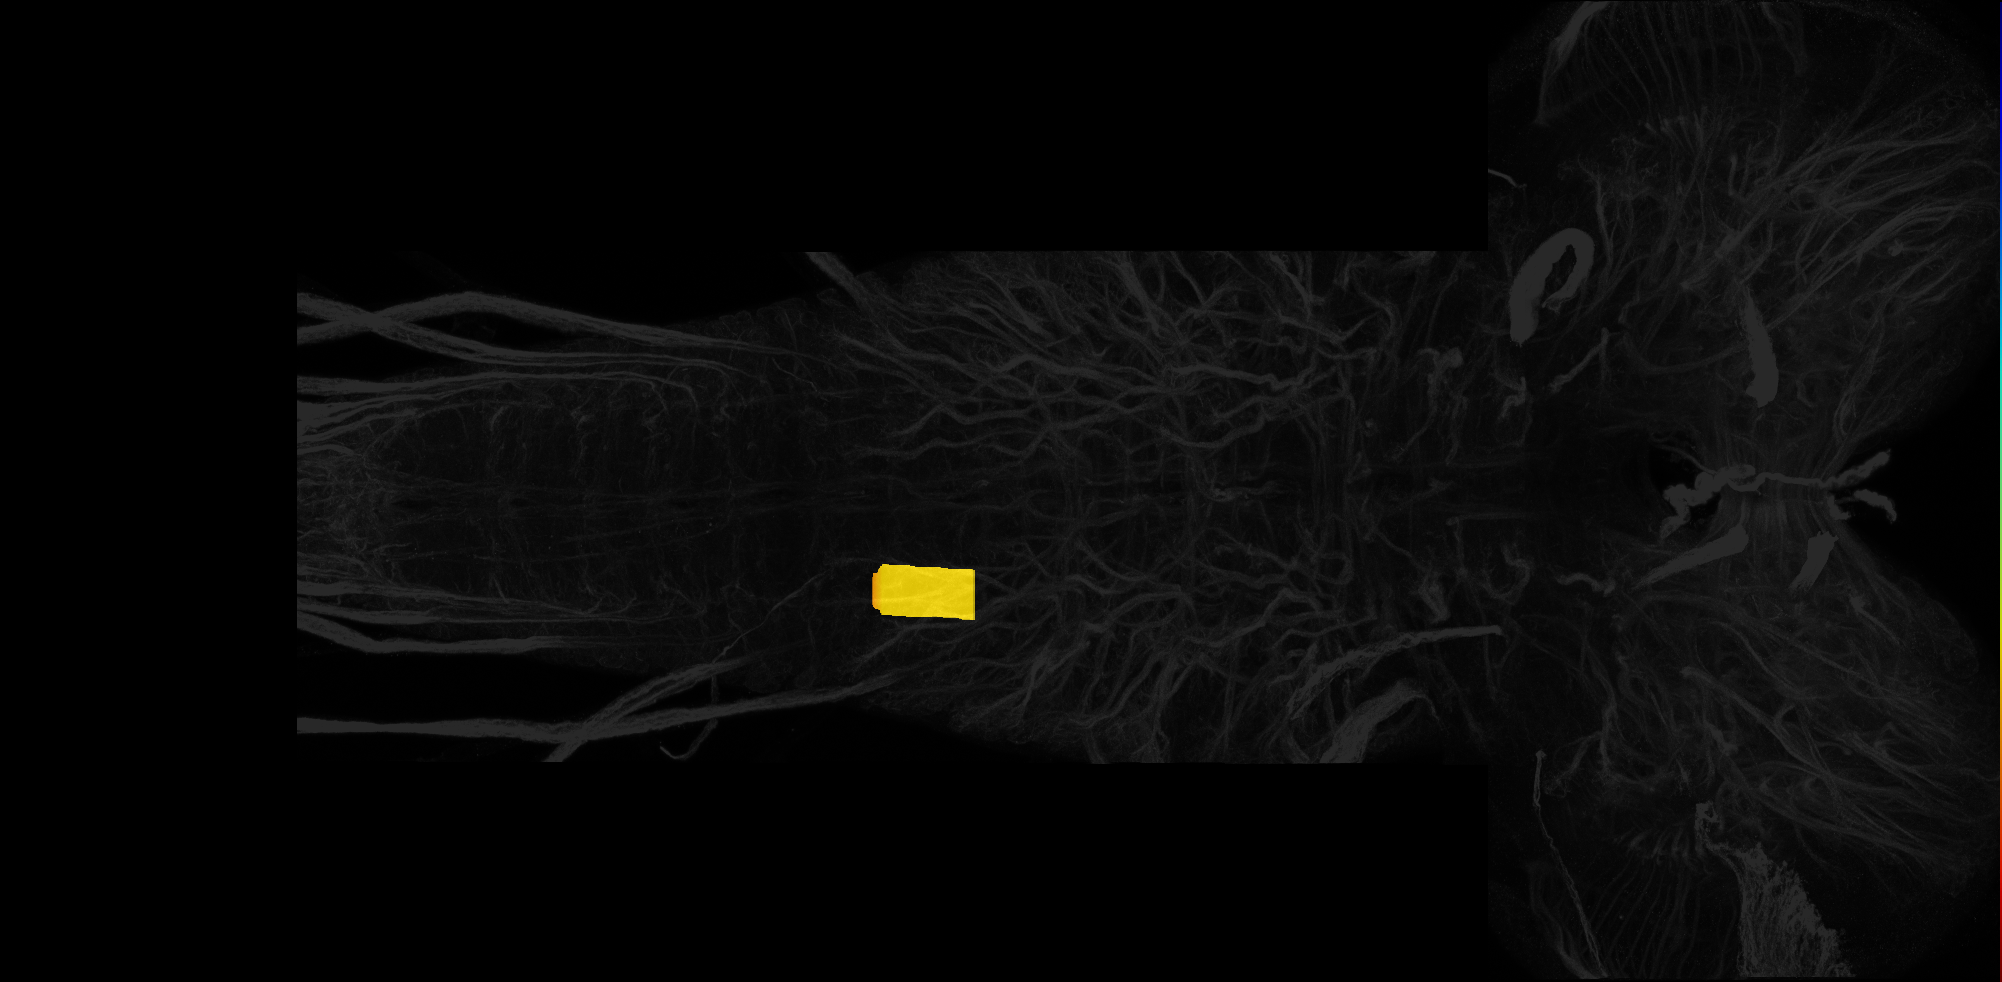 right centrolateral neuropil of A2 on L3 CNS template, Wood2018